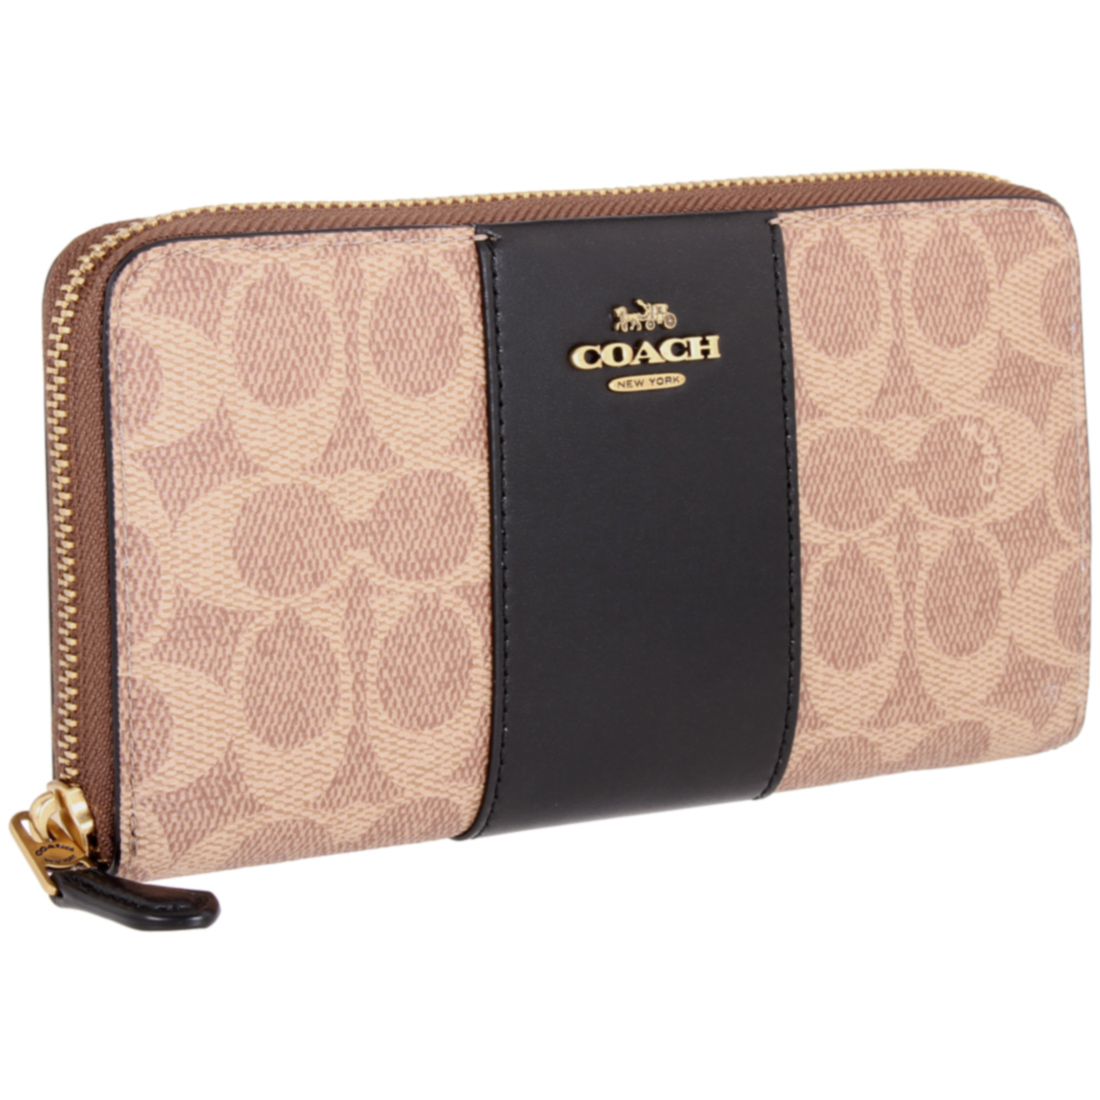 Coach Signature Ladies Small Multi-Color Leather Wallets 31546B4OOH ...